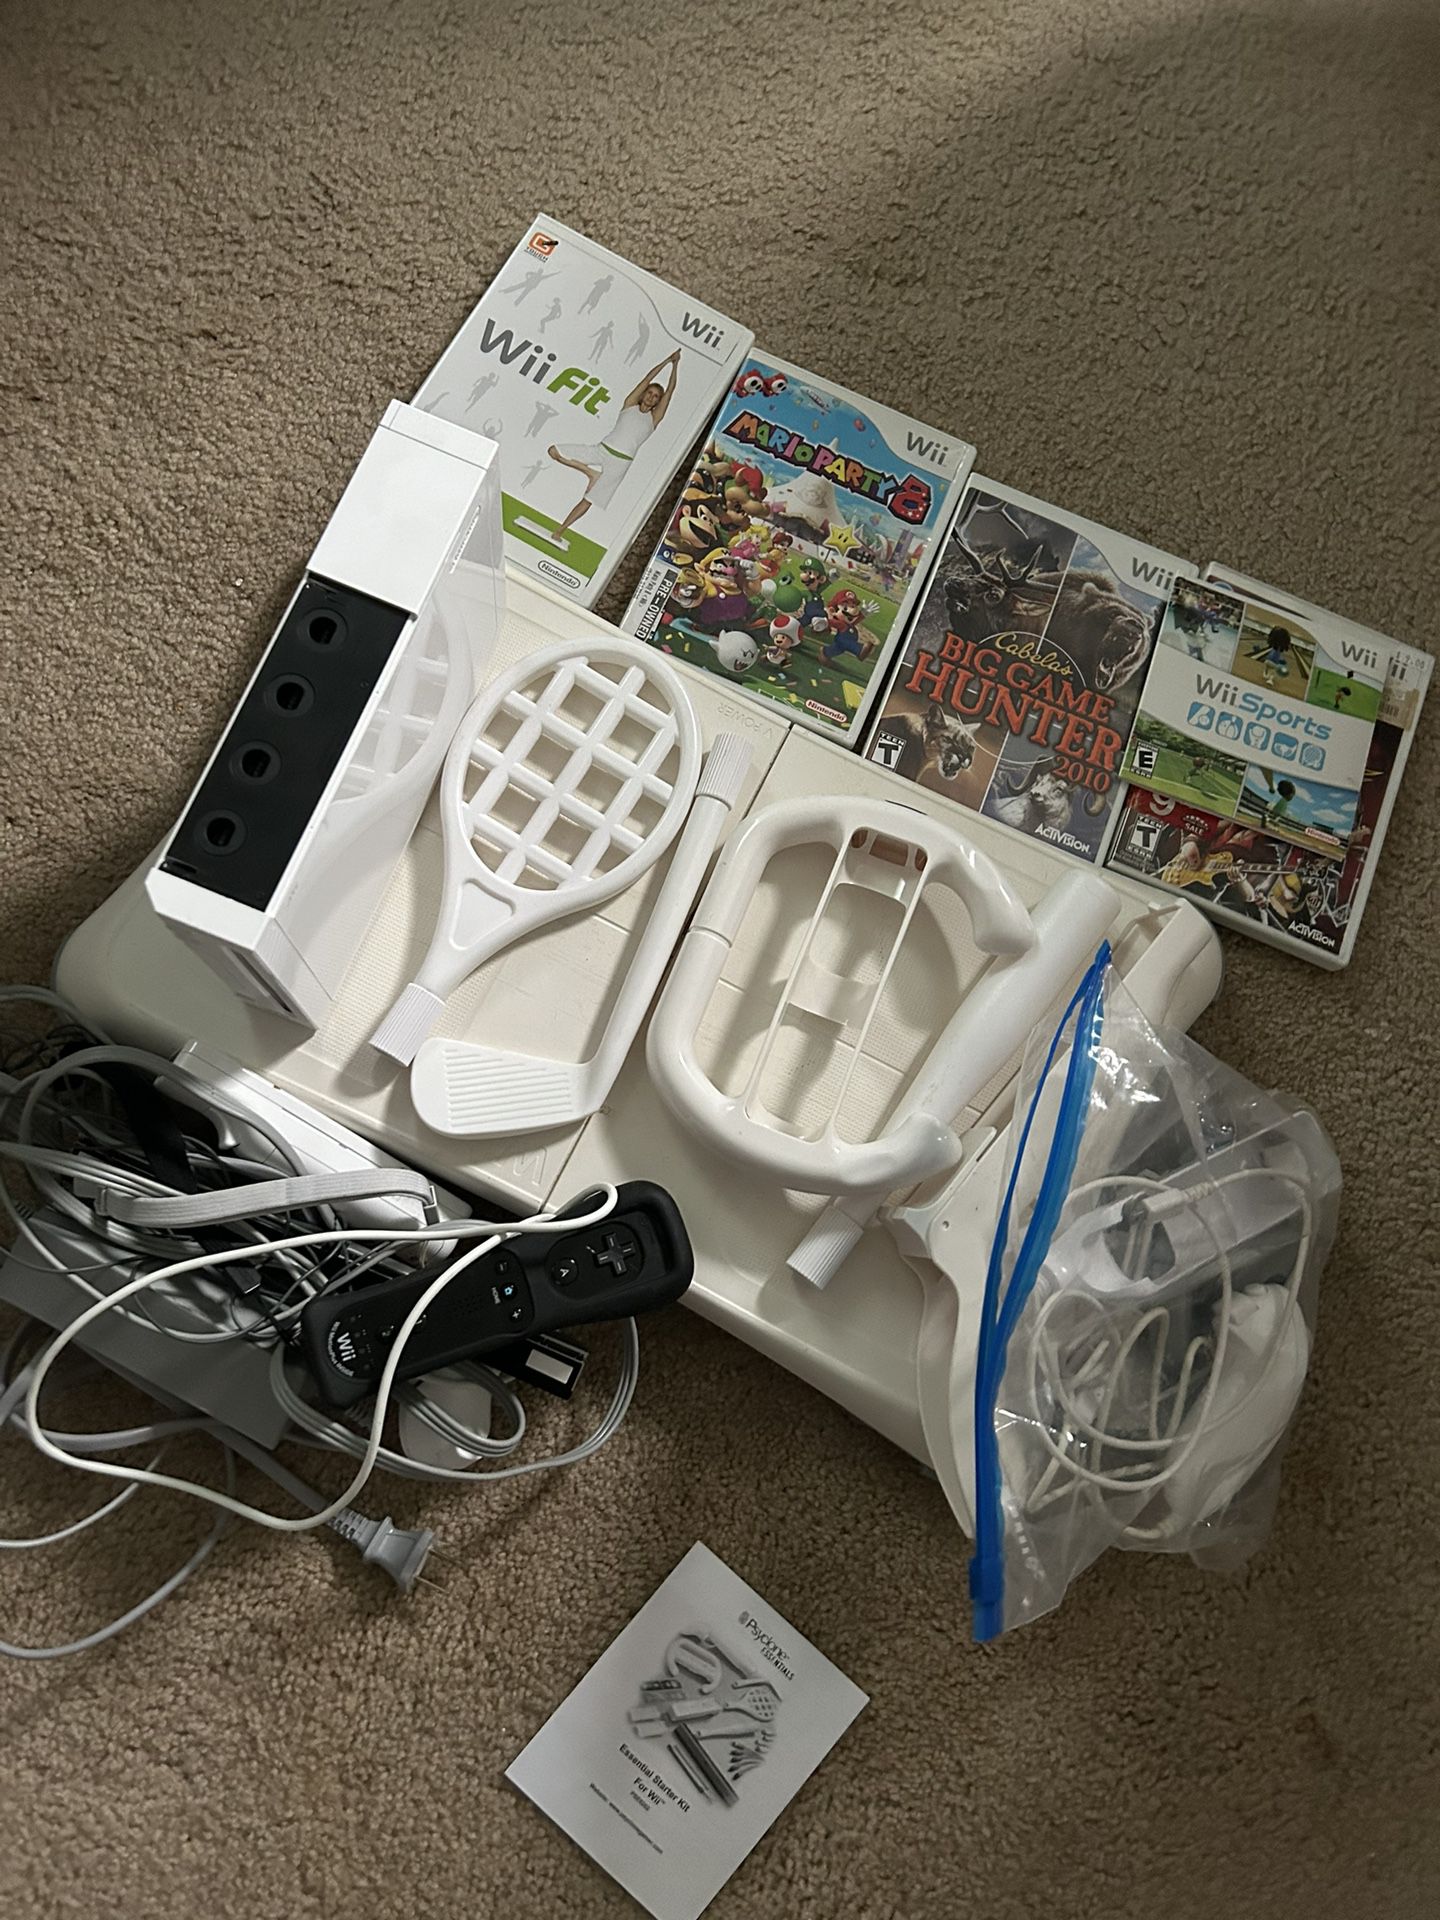 Nintendo Wii With Everything Pictured